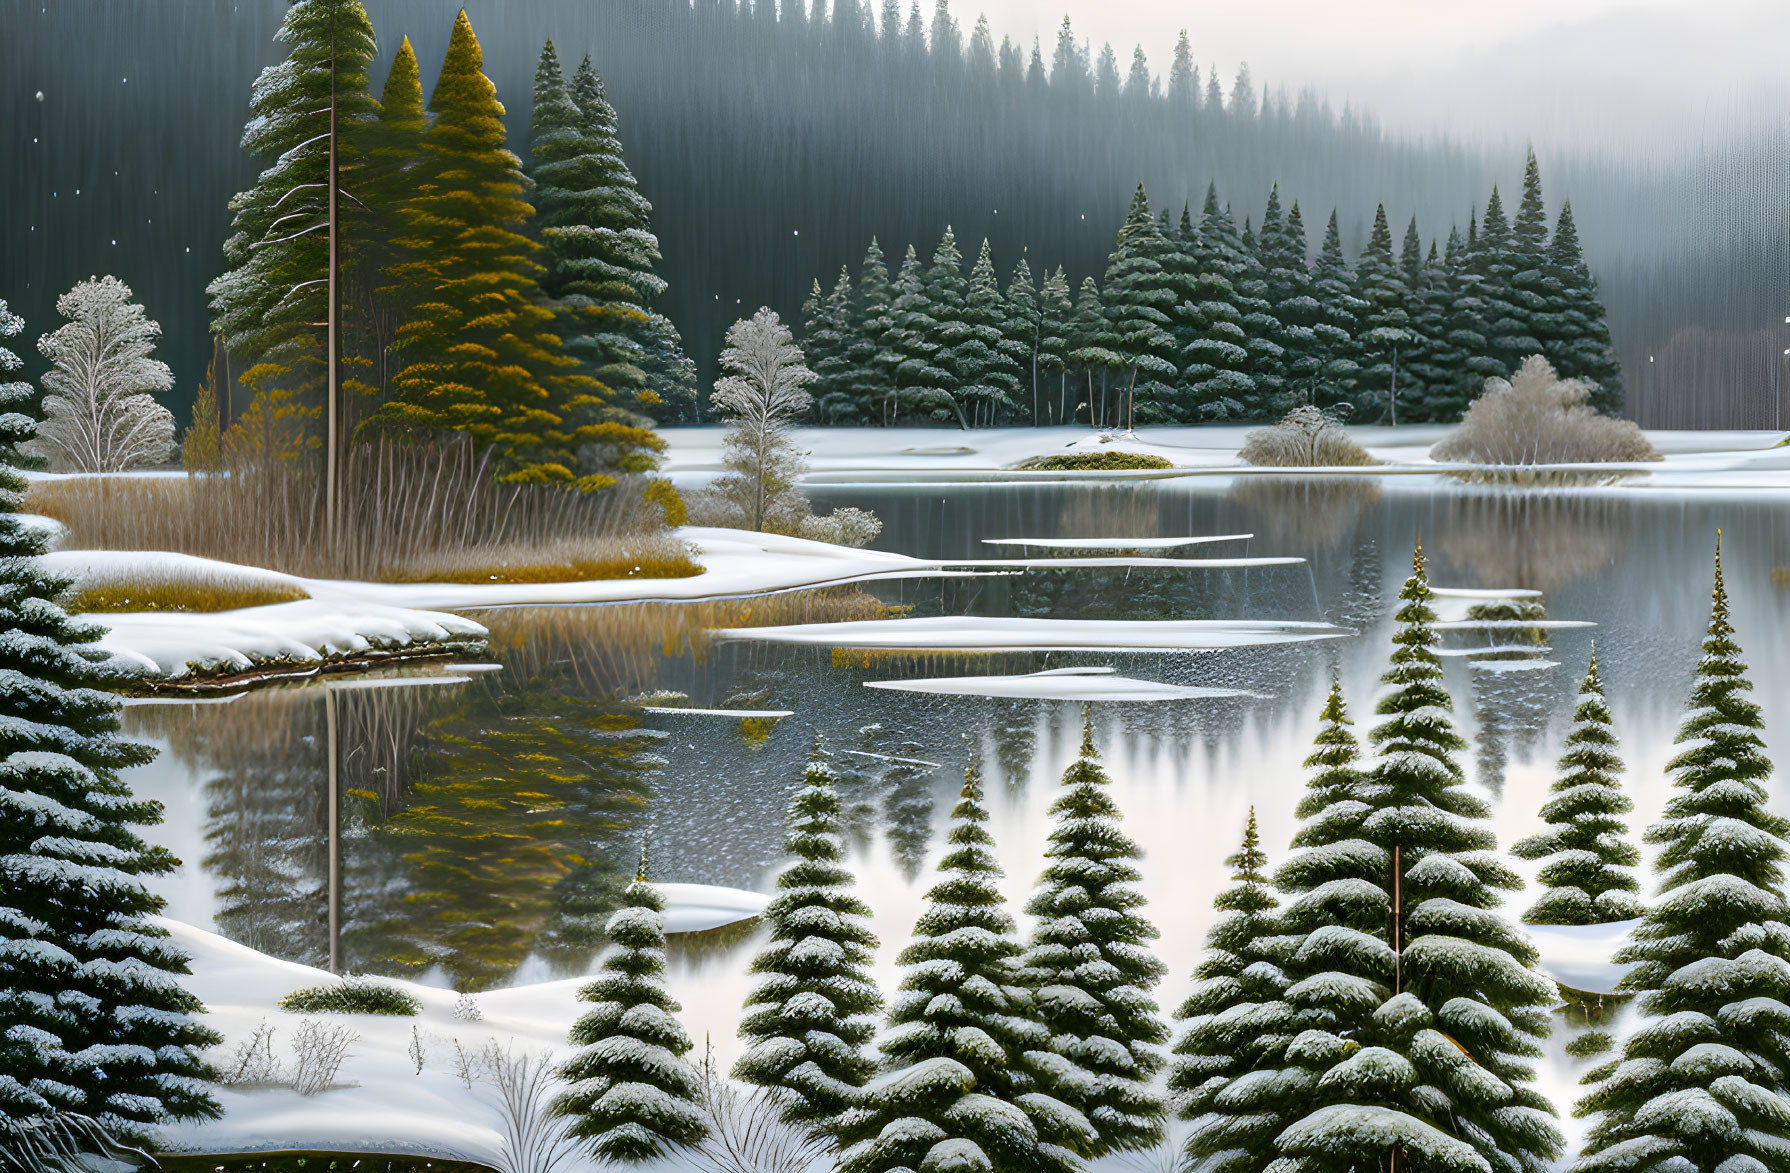 Snow-covered fir trees and frozen lake in serene winter landscape